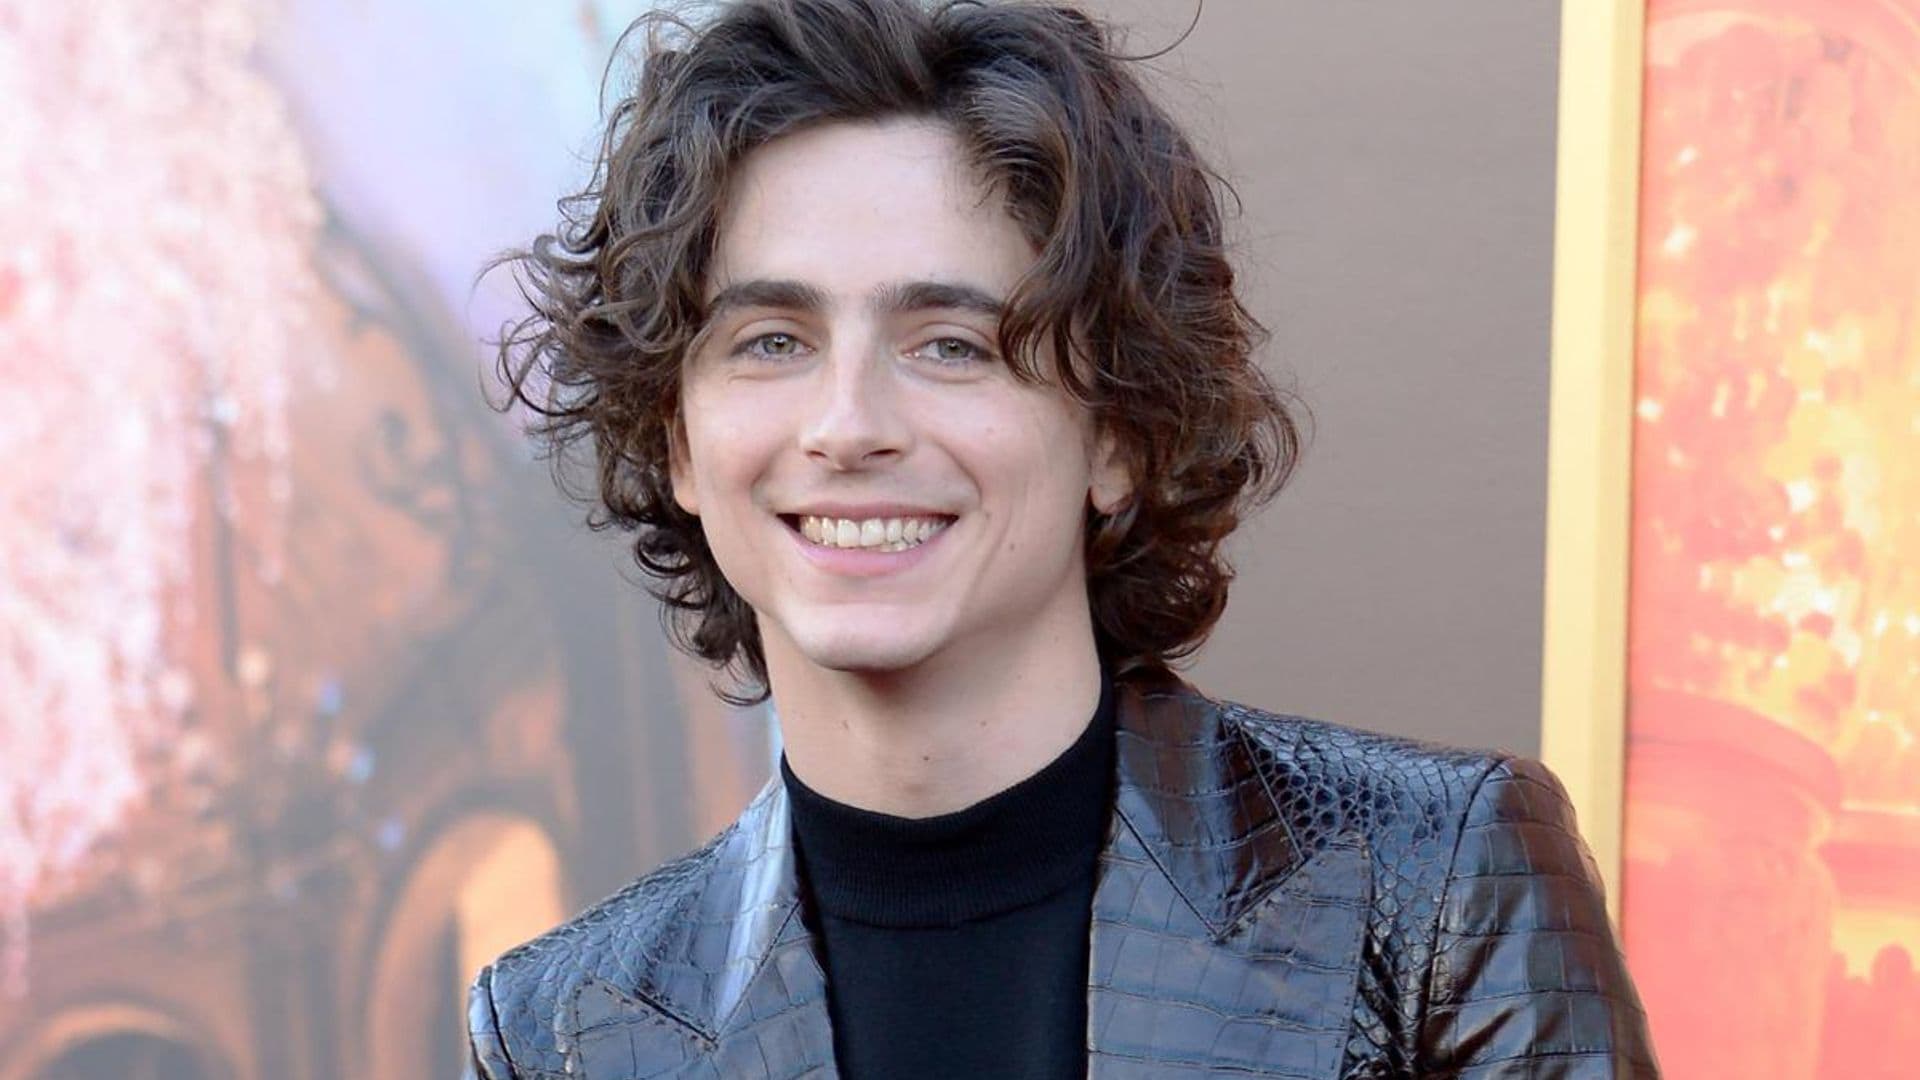 Capricorn celebrities: Timothée Chalamet, Ricky Martin, Michelle Obama, and more